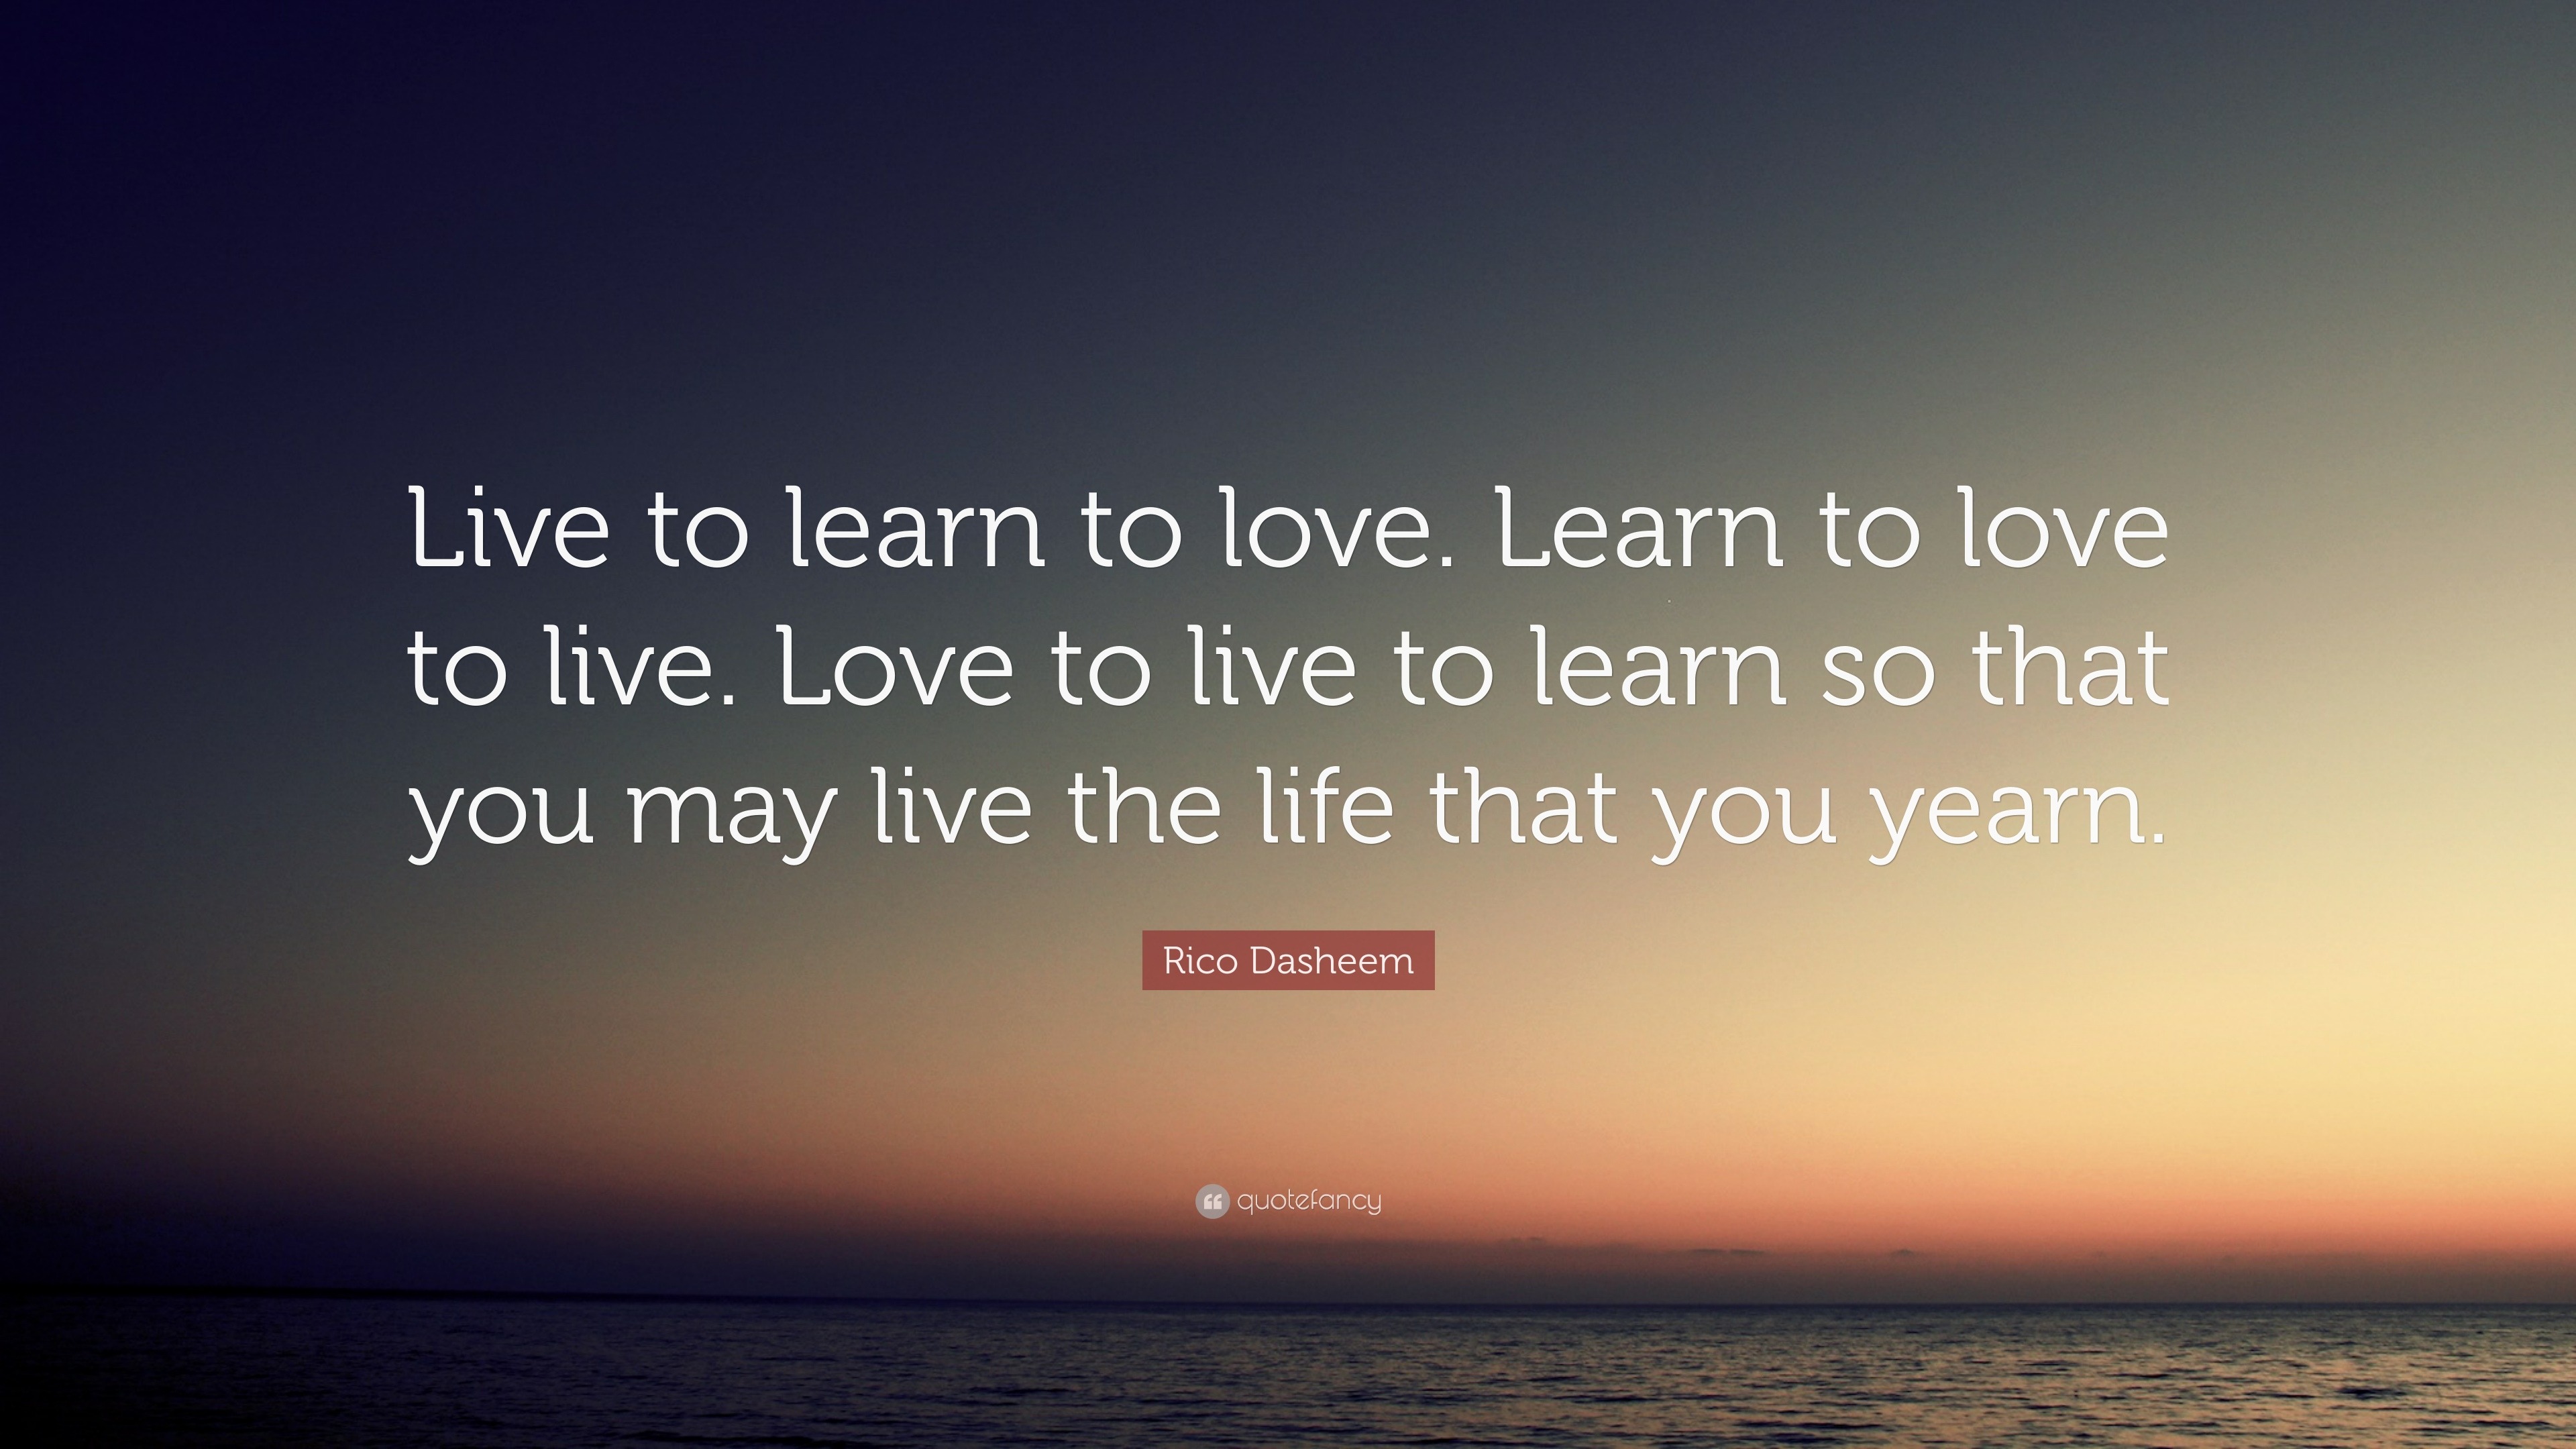 Rico Dasheem Quote “Live to learn to love Learn to love to live